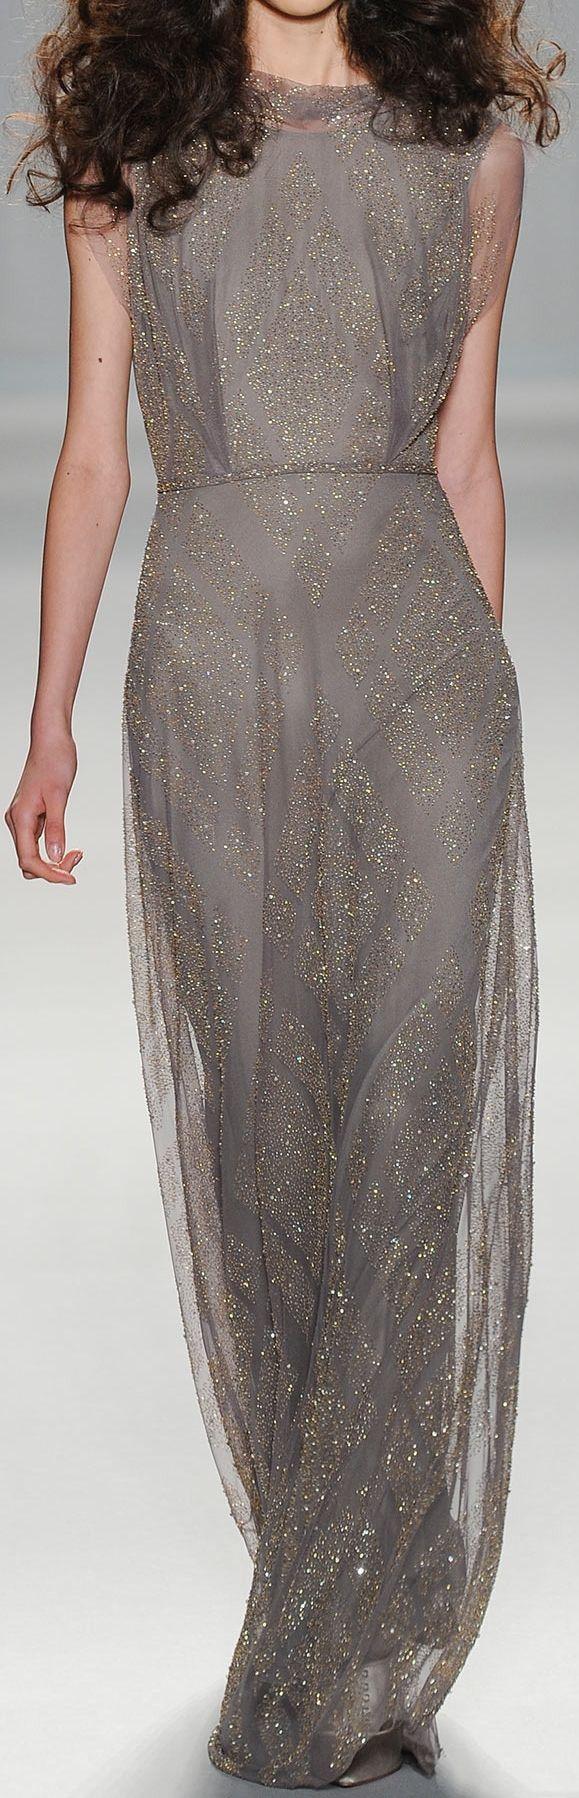 Mariage - Jenny Packham Spring 2014 Ready-to-Wear Fashion Show: Complete Collection